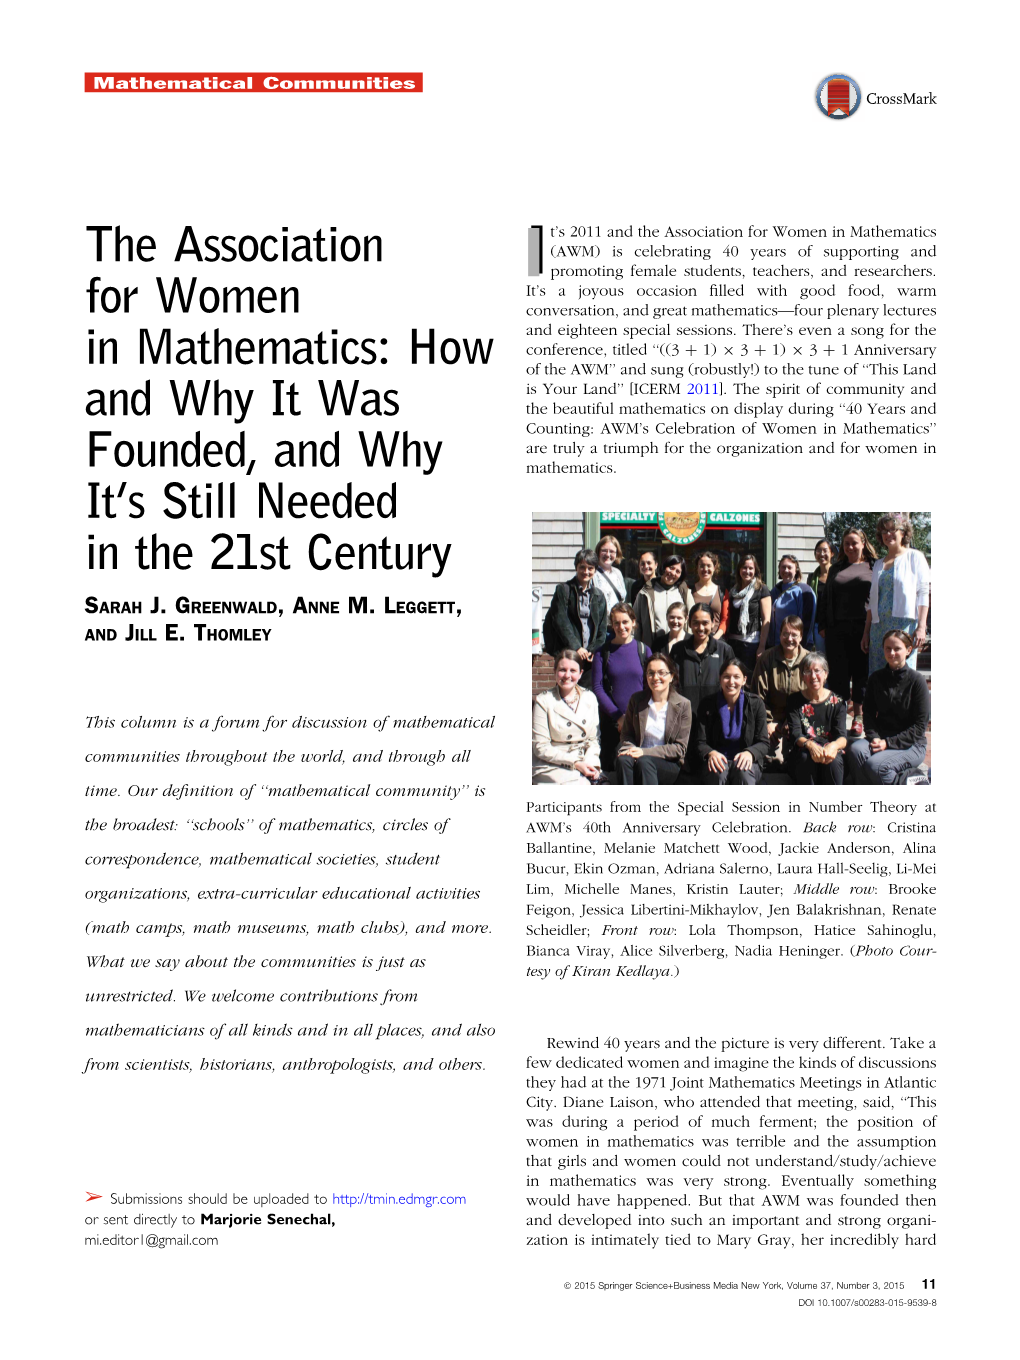 The Association for Women in Mathematics: How and Why It Was